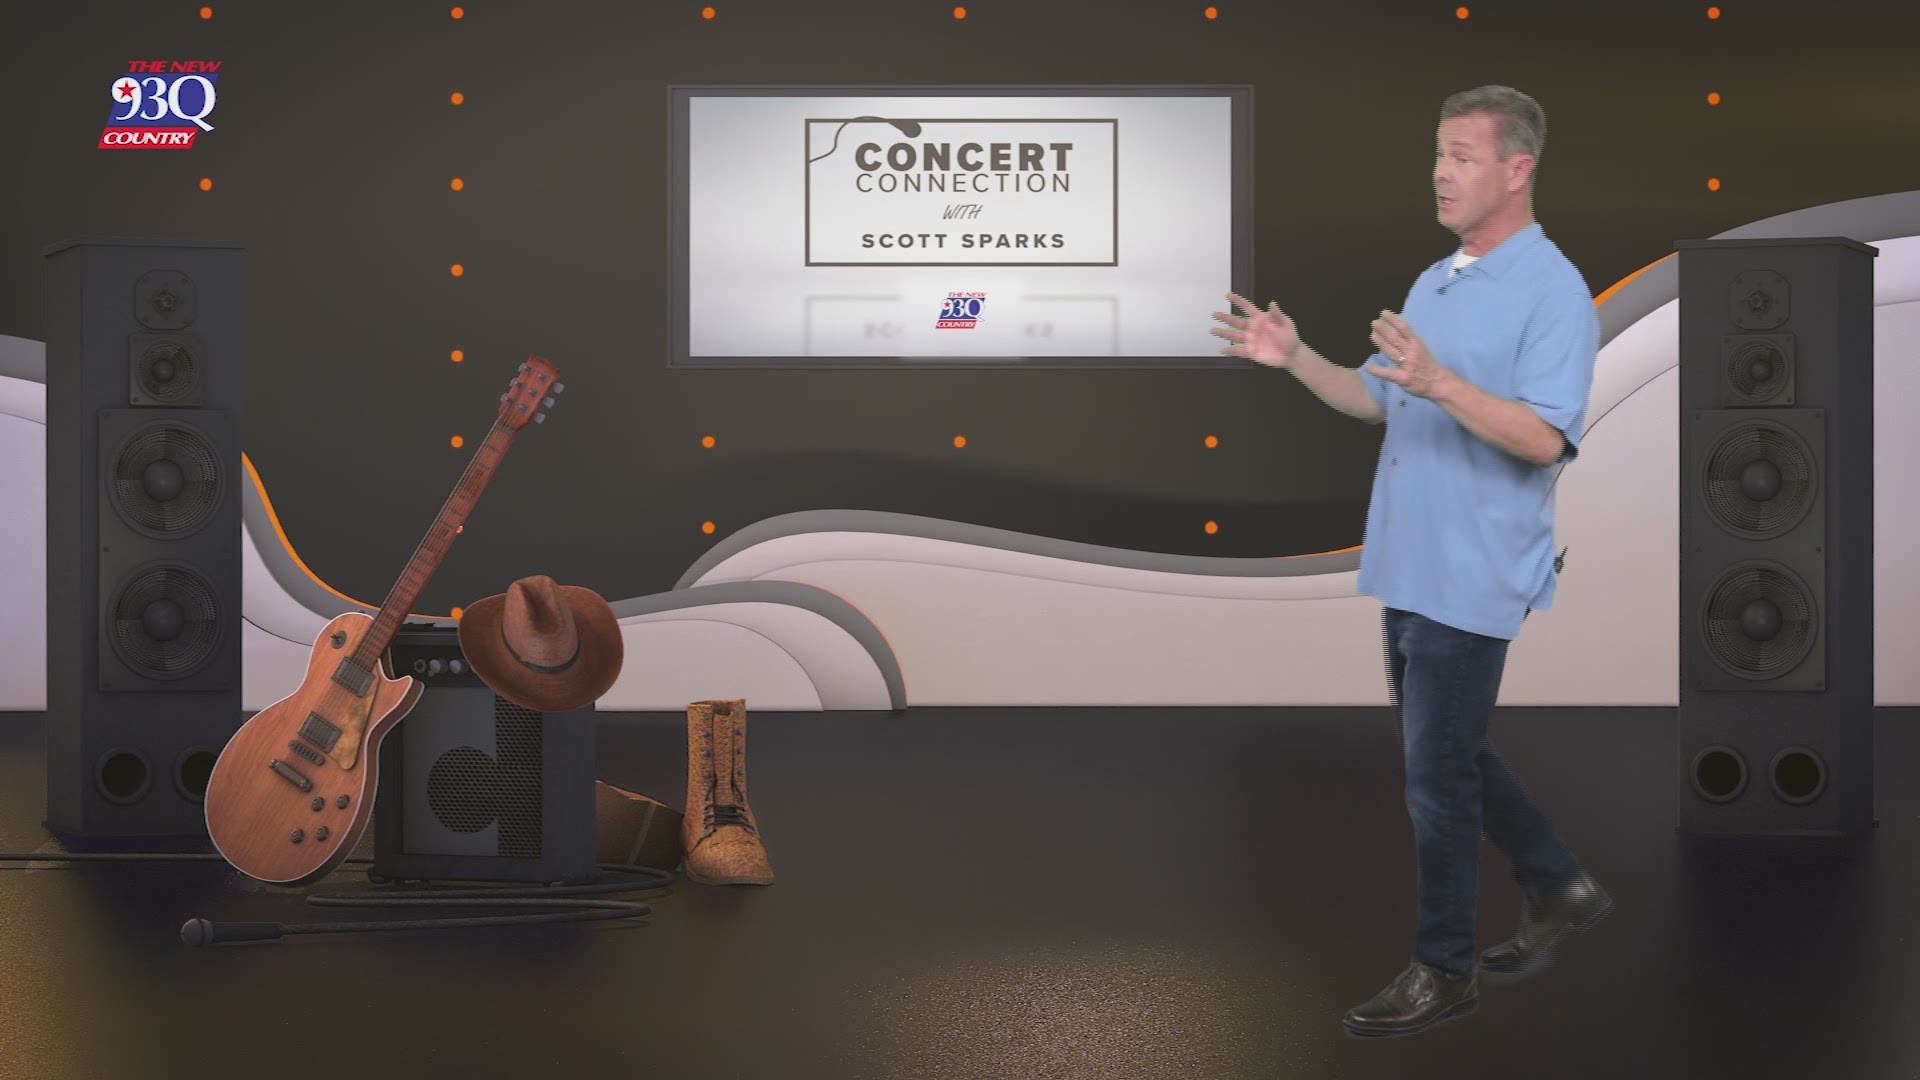 Rascal Flatts is coming to the the Smart Financial Centre in Sugar Land on August 29 and you can win tickets to the show! Check out KHOU's Concert Connection page on KHOU.com.